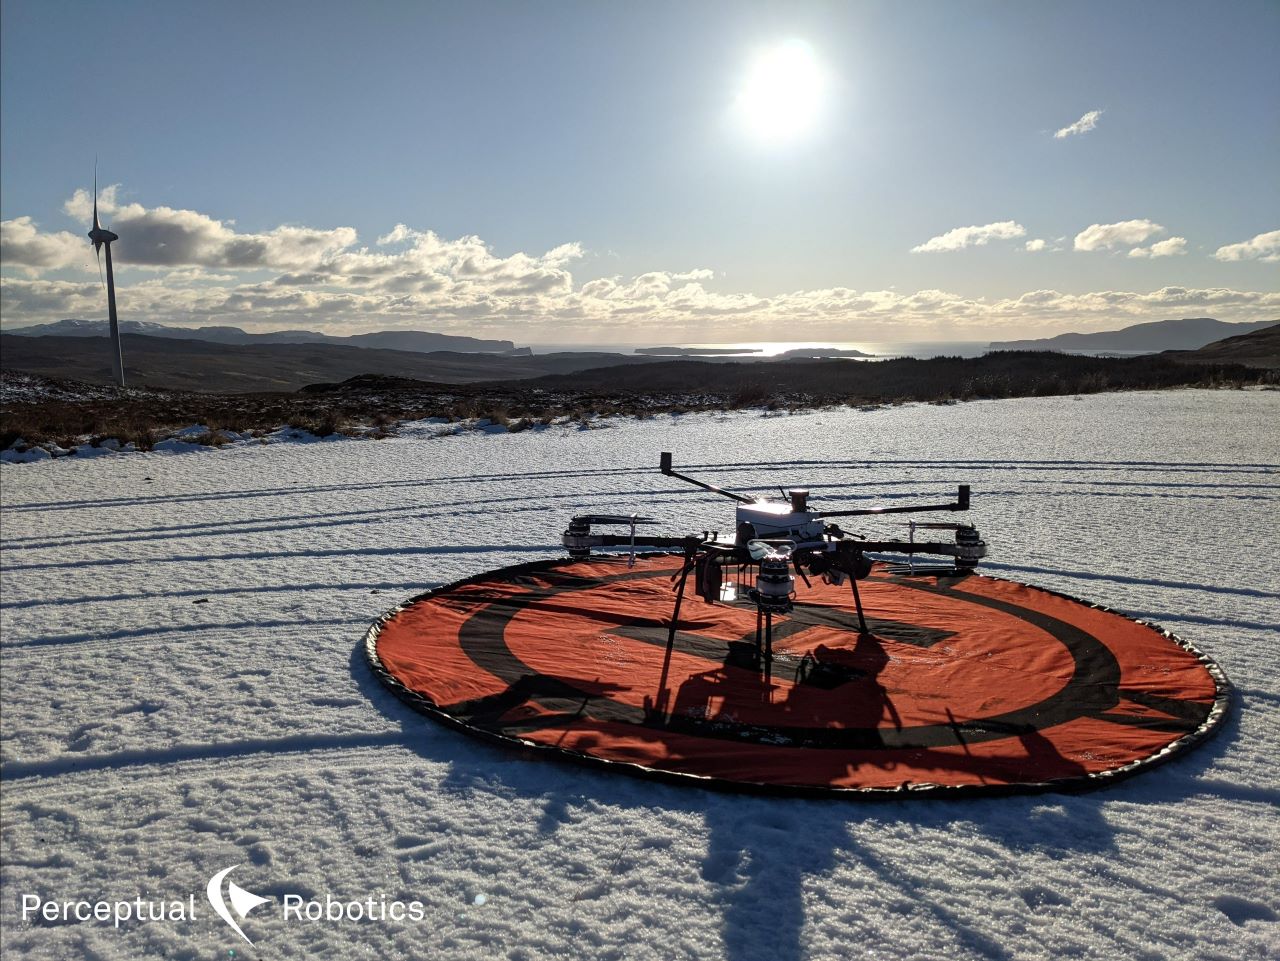 This image is of our drone on a snow covered ground at the start of an inspection. There is a wind turbine in the far distance.